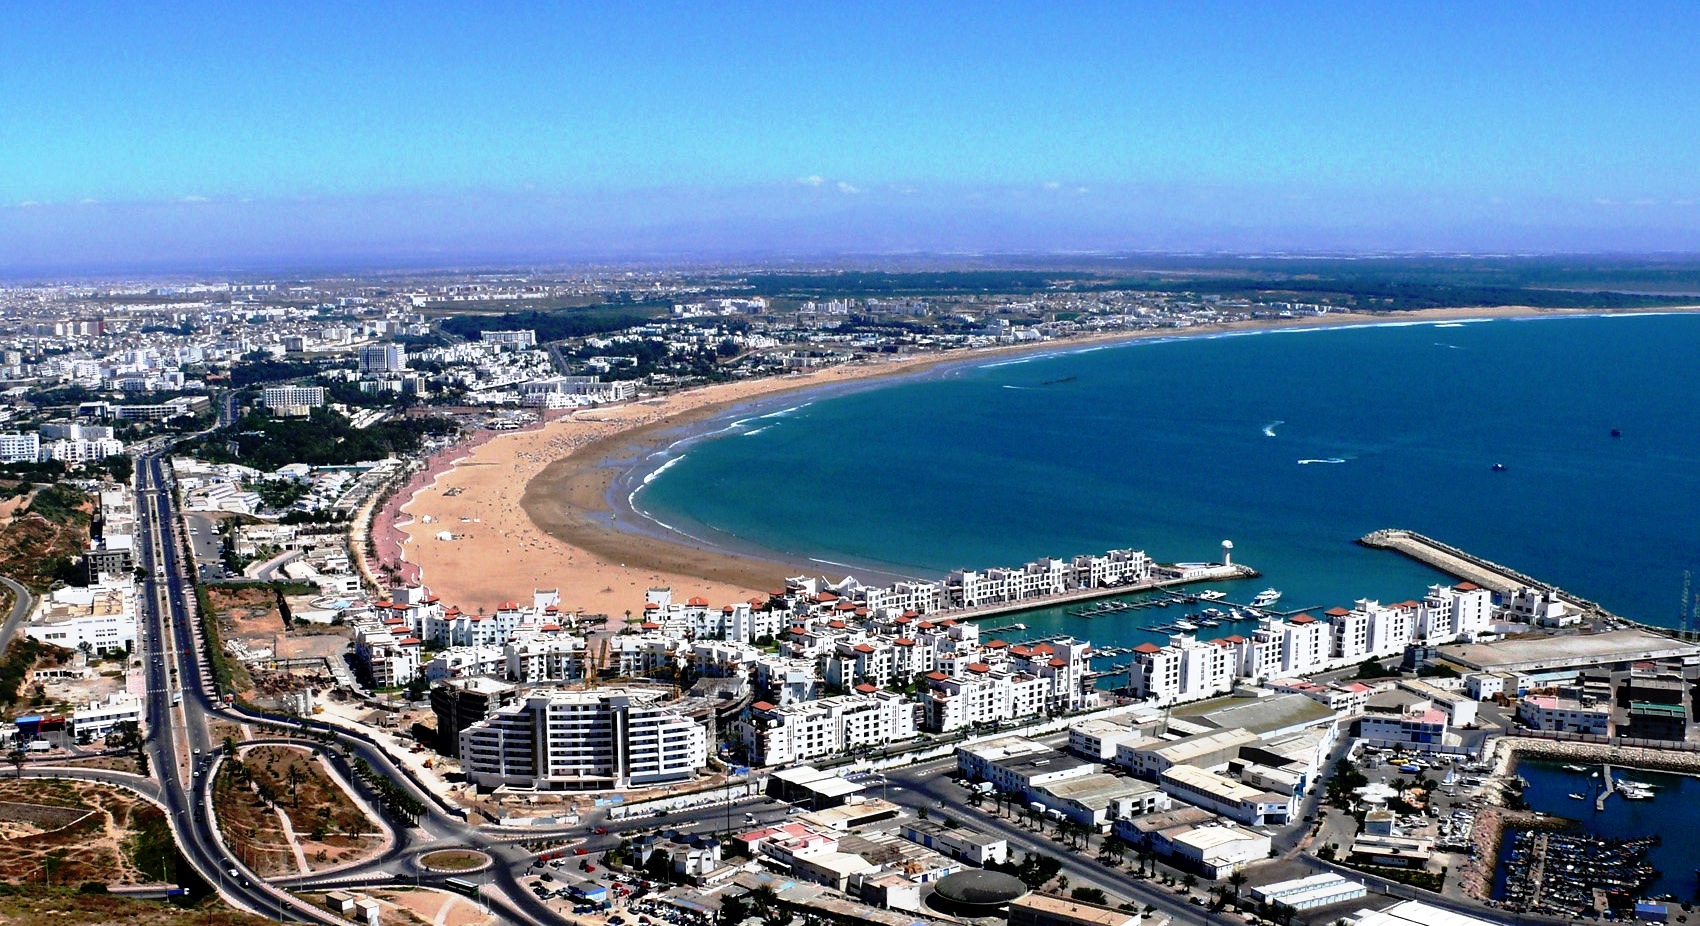 12 days visit Morocco tour from Agadir to discover Morocco